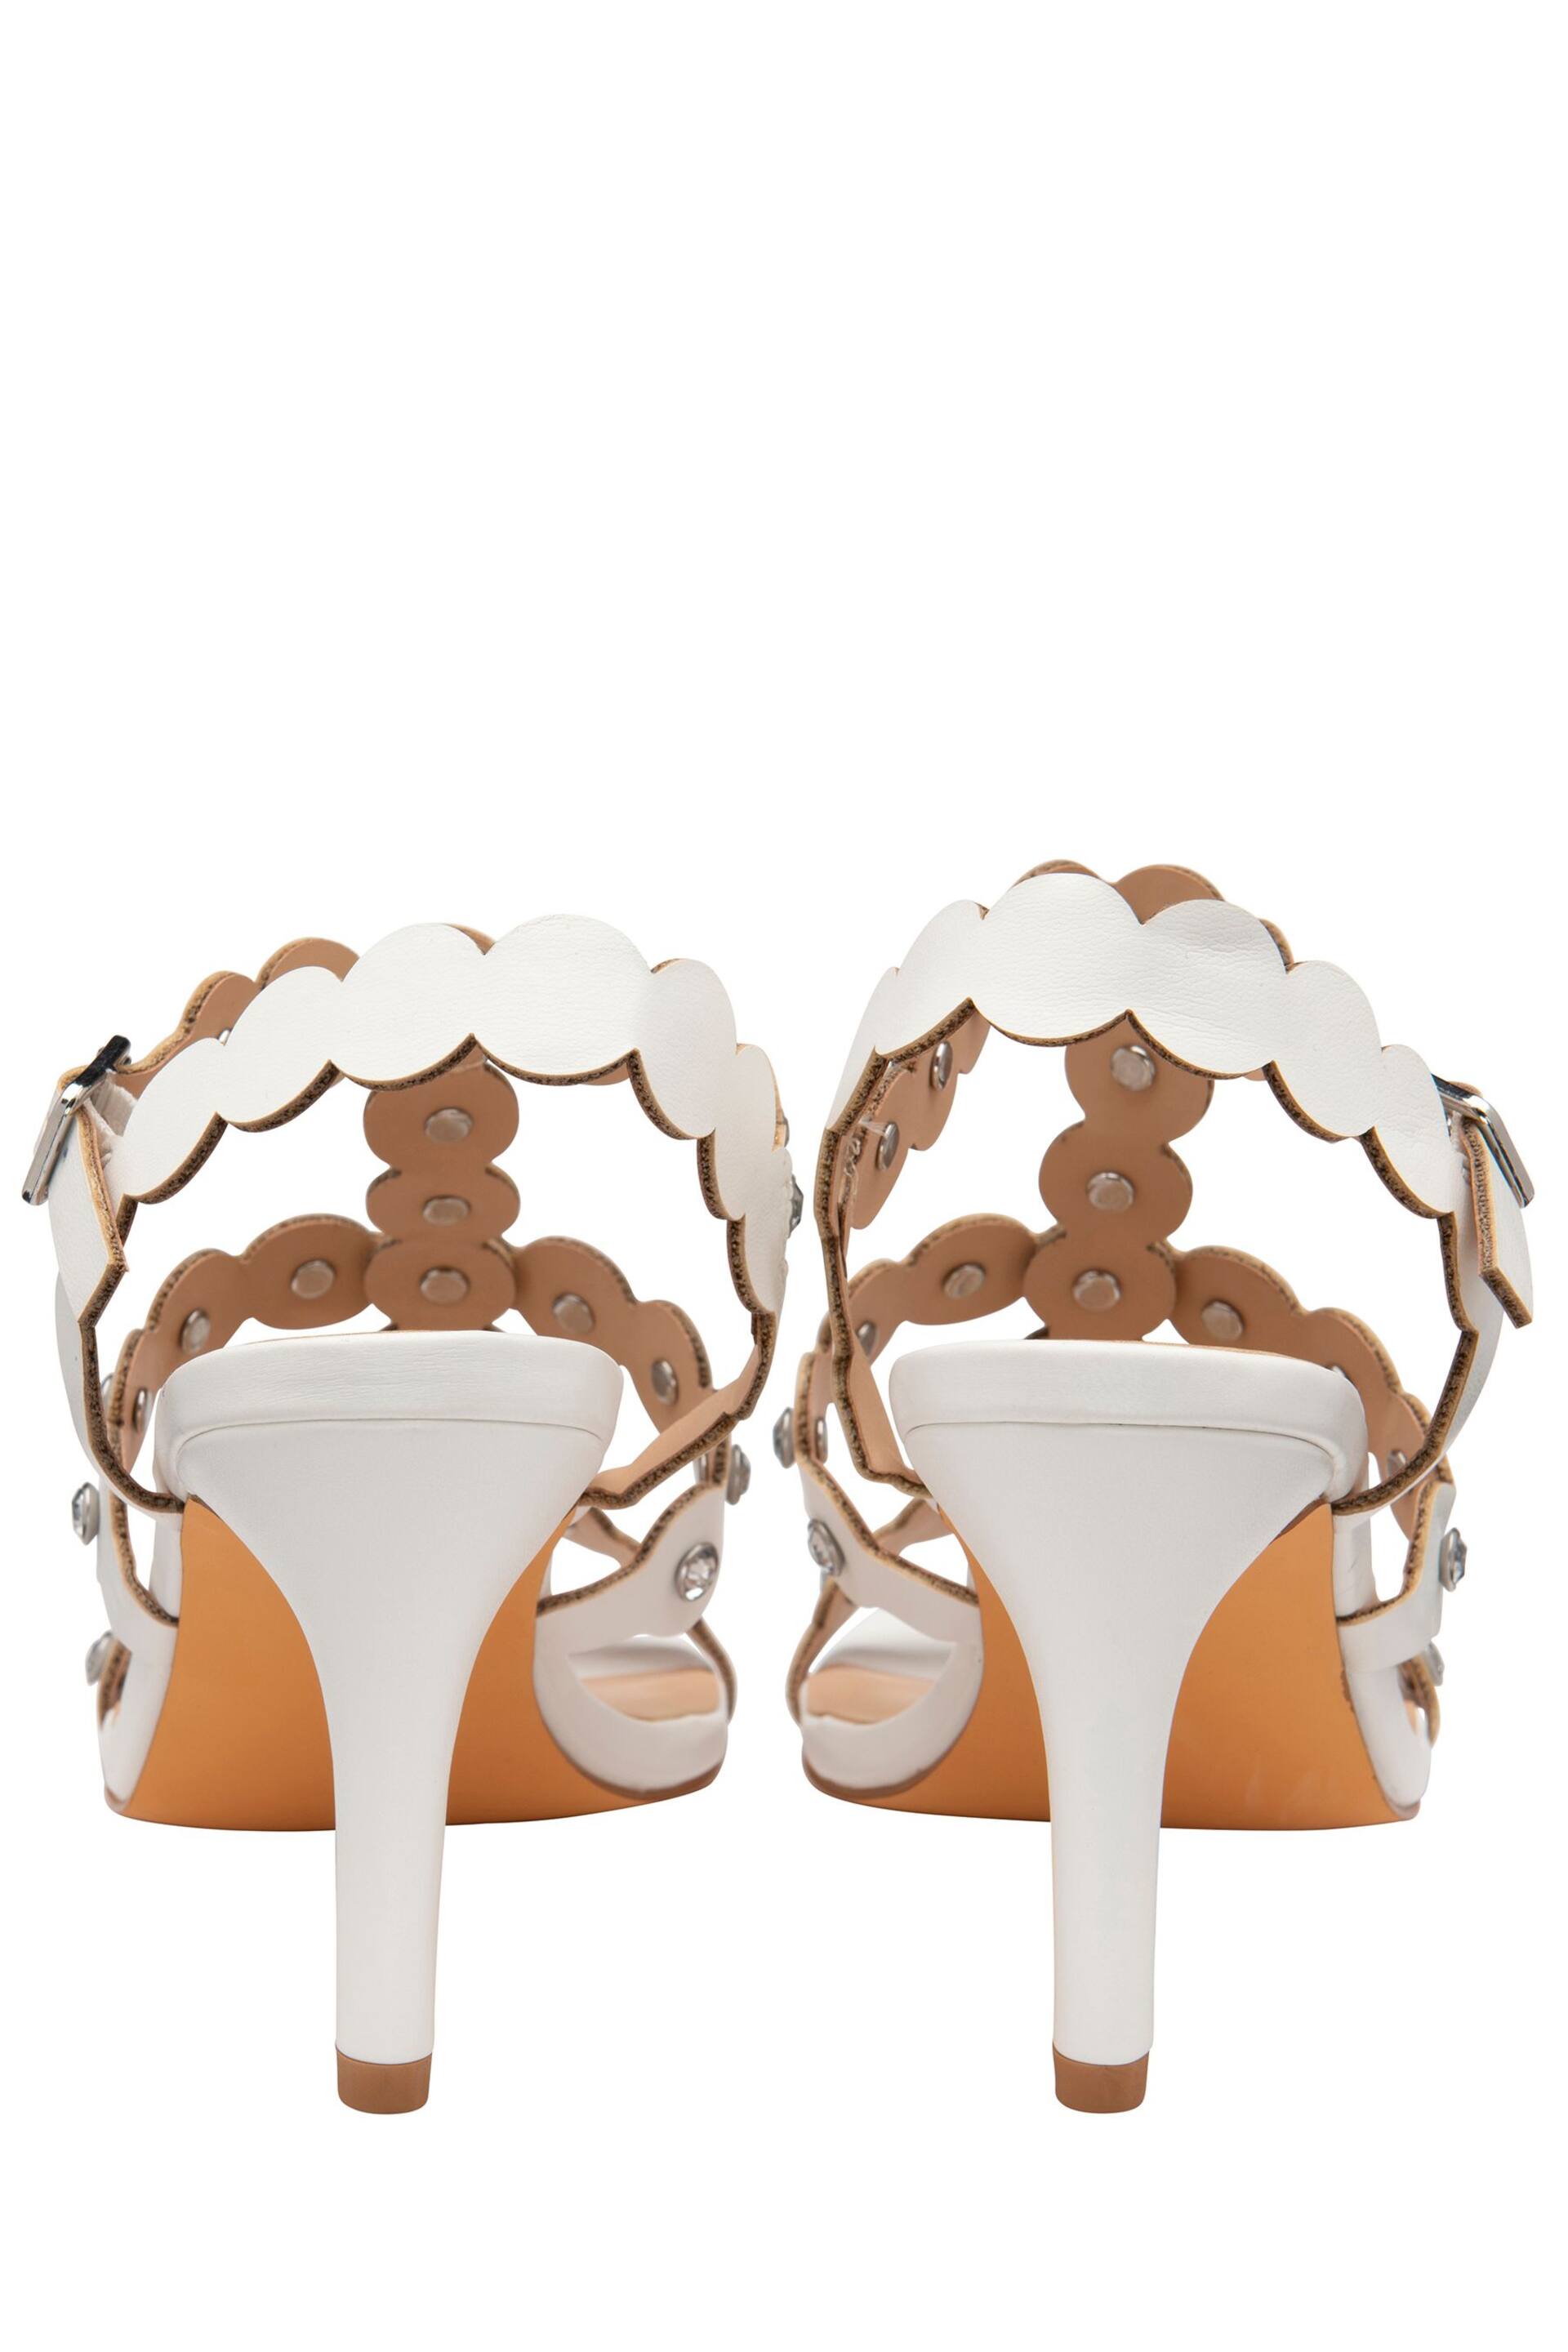 Lotus White Open-Toe Sandals - Image 3 of 4